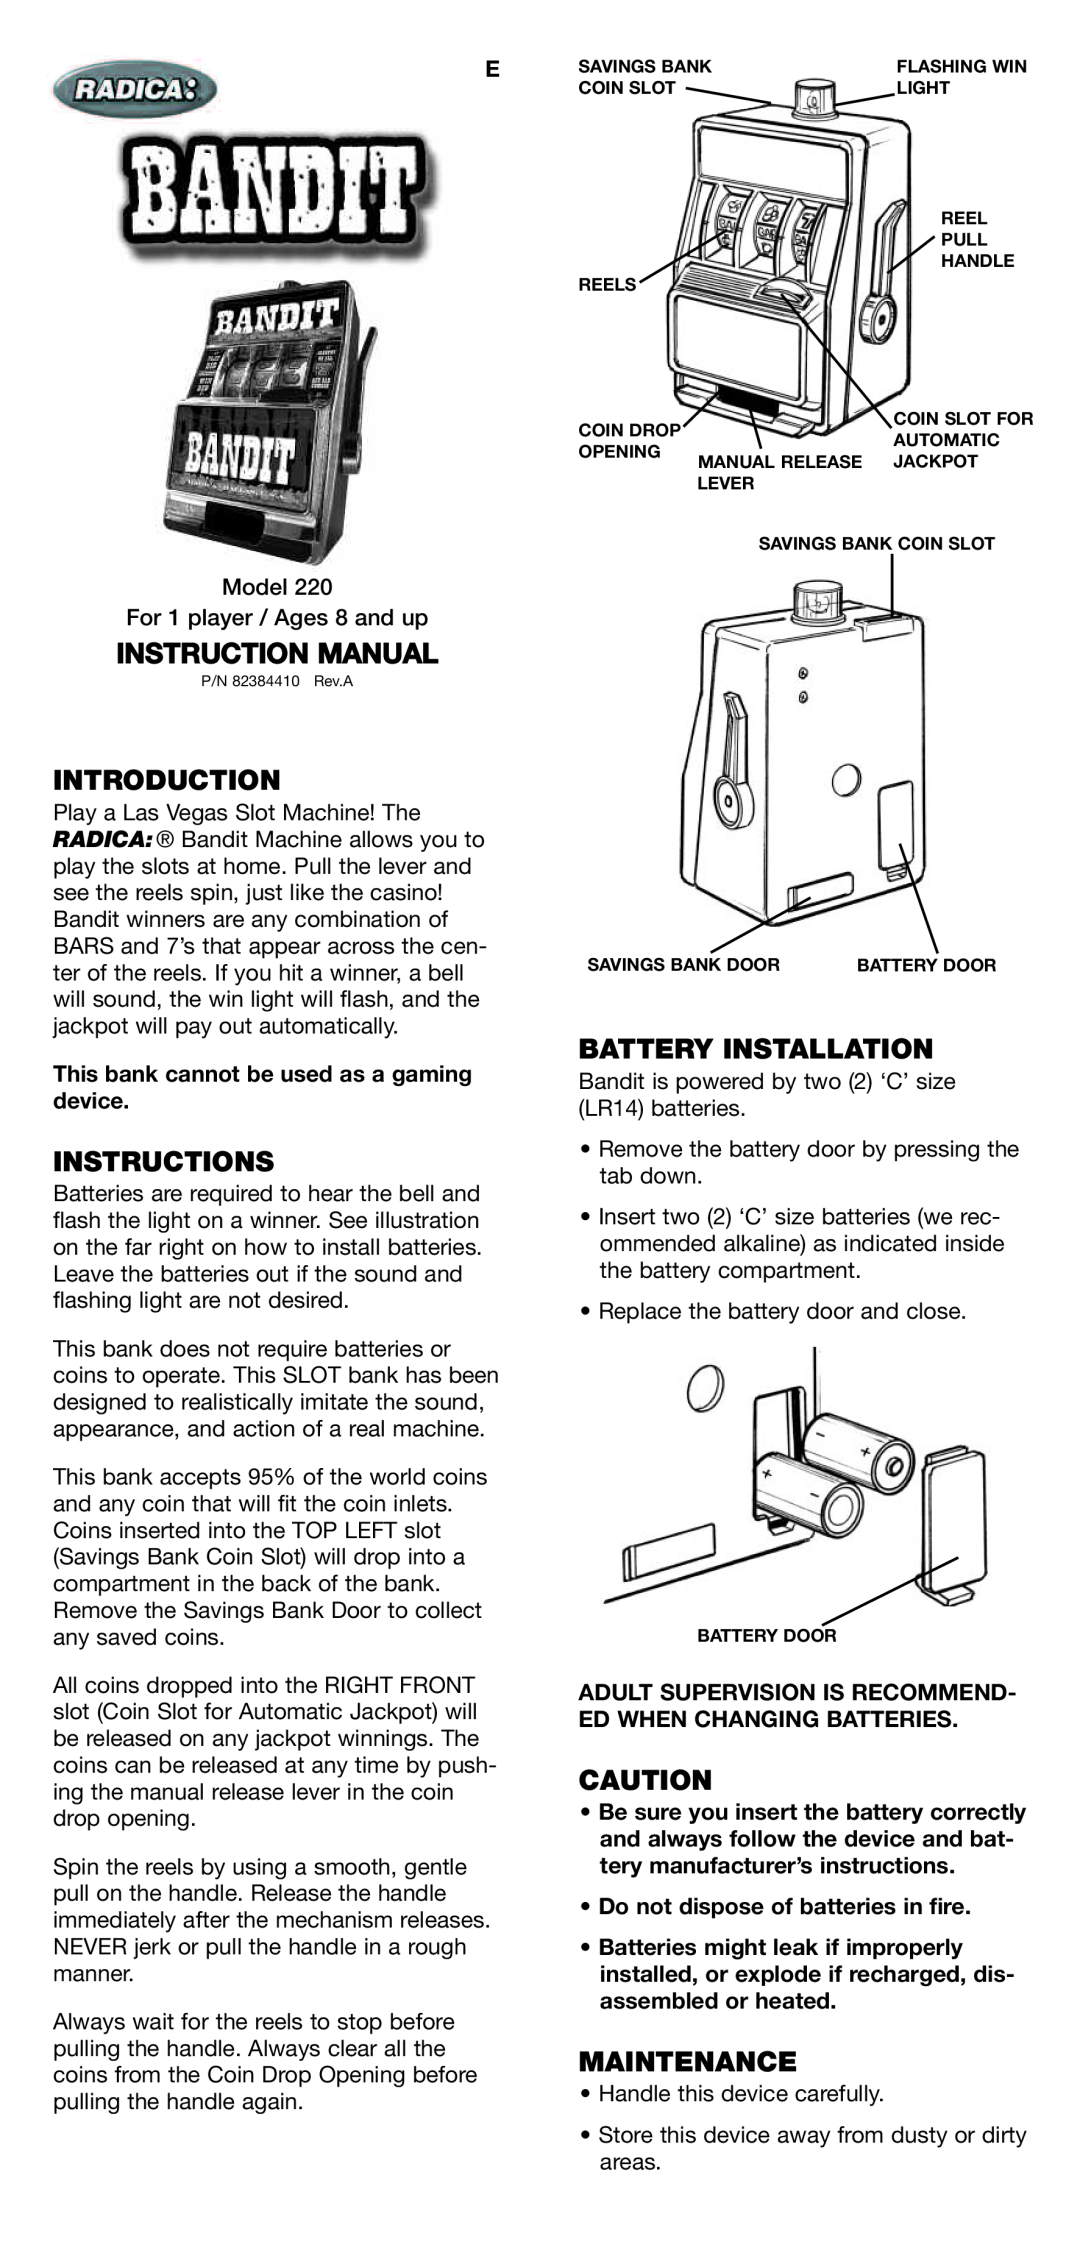 Radica Games 220 manual Introduction, Instructions, Battery Installation, Maintenance, Do not dispose of batteries in fire 